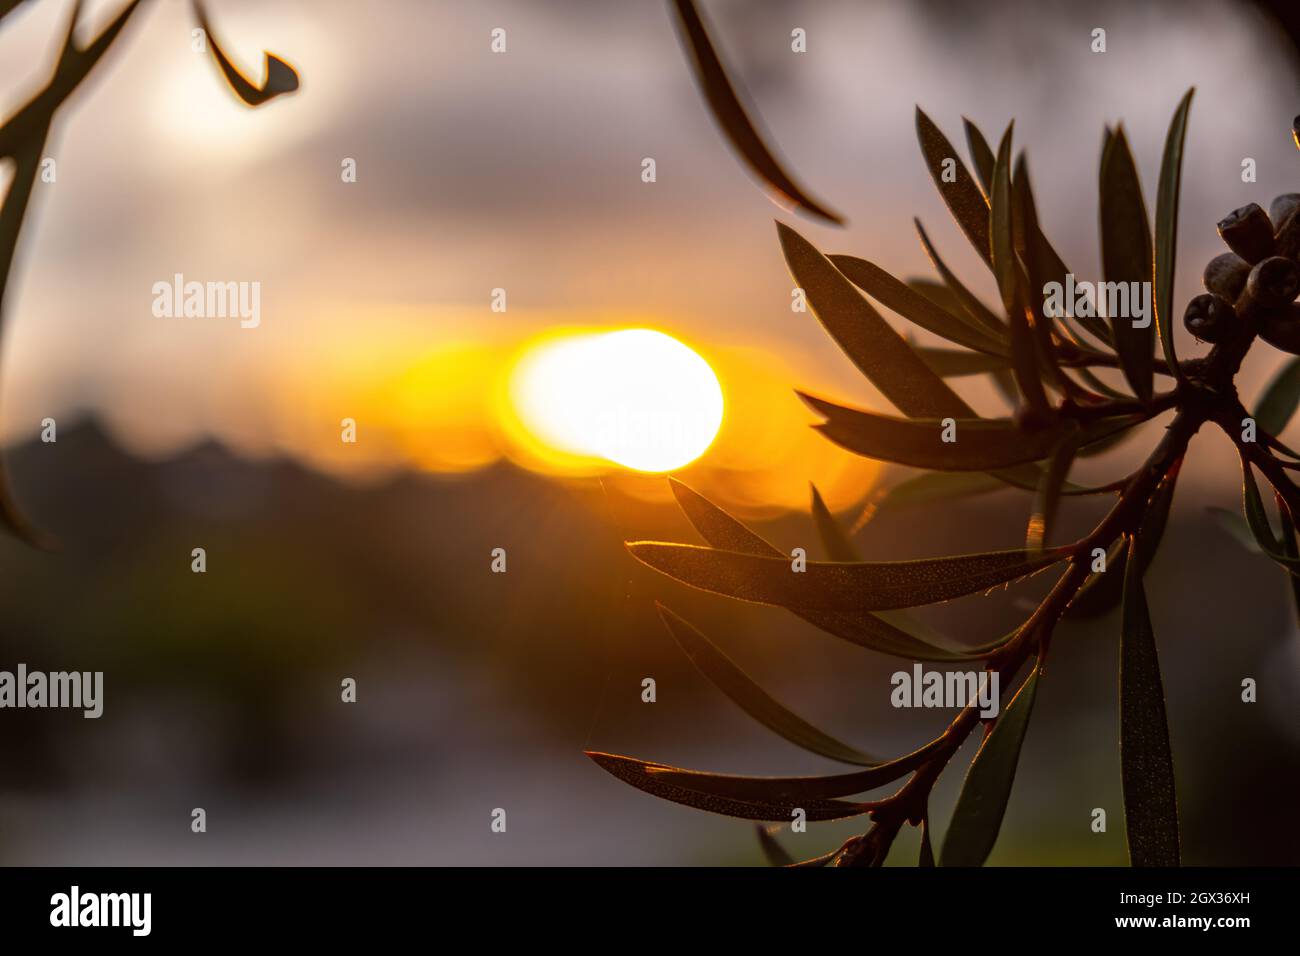 Blurred Sun Through Eucalyptus Tree Branches At Sunset With Copy Space Stock Photo